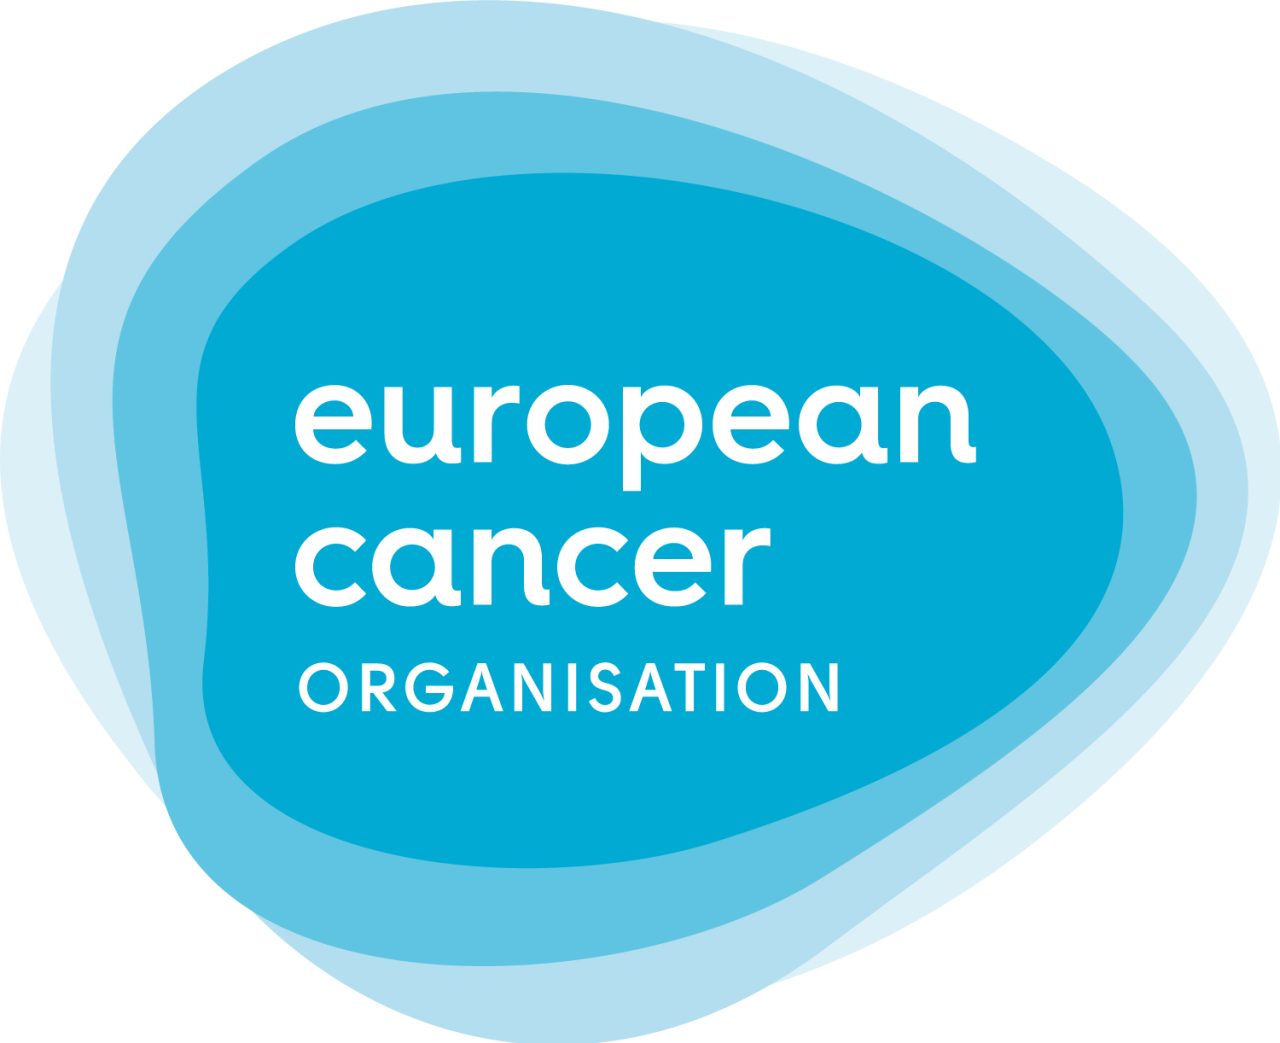 The healthcare workforce is facing a serious crisis – European Cancer Organisation